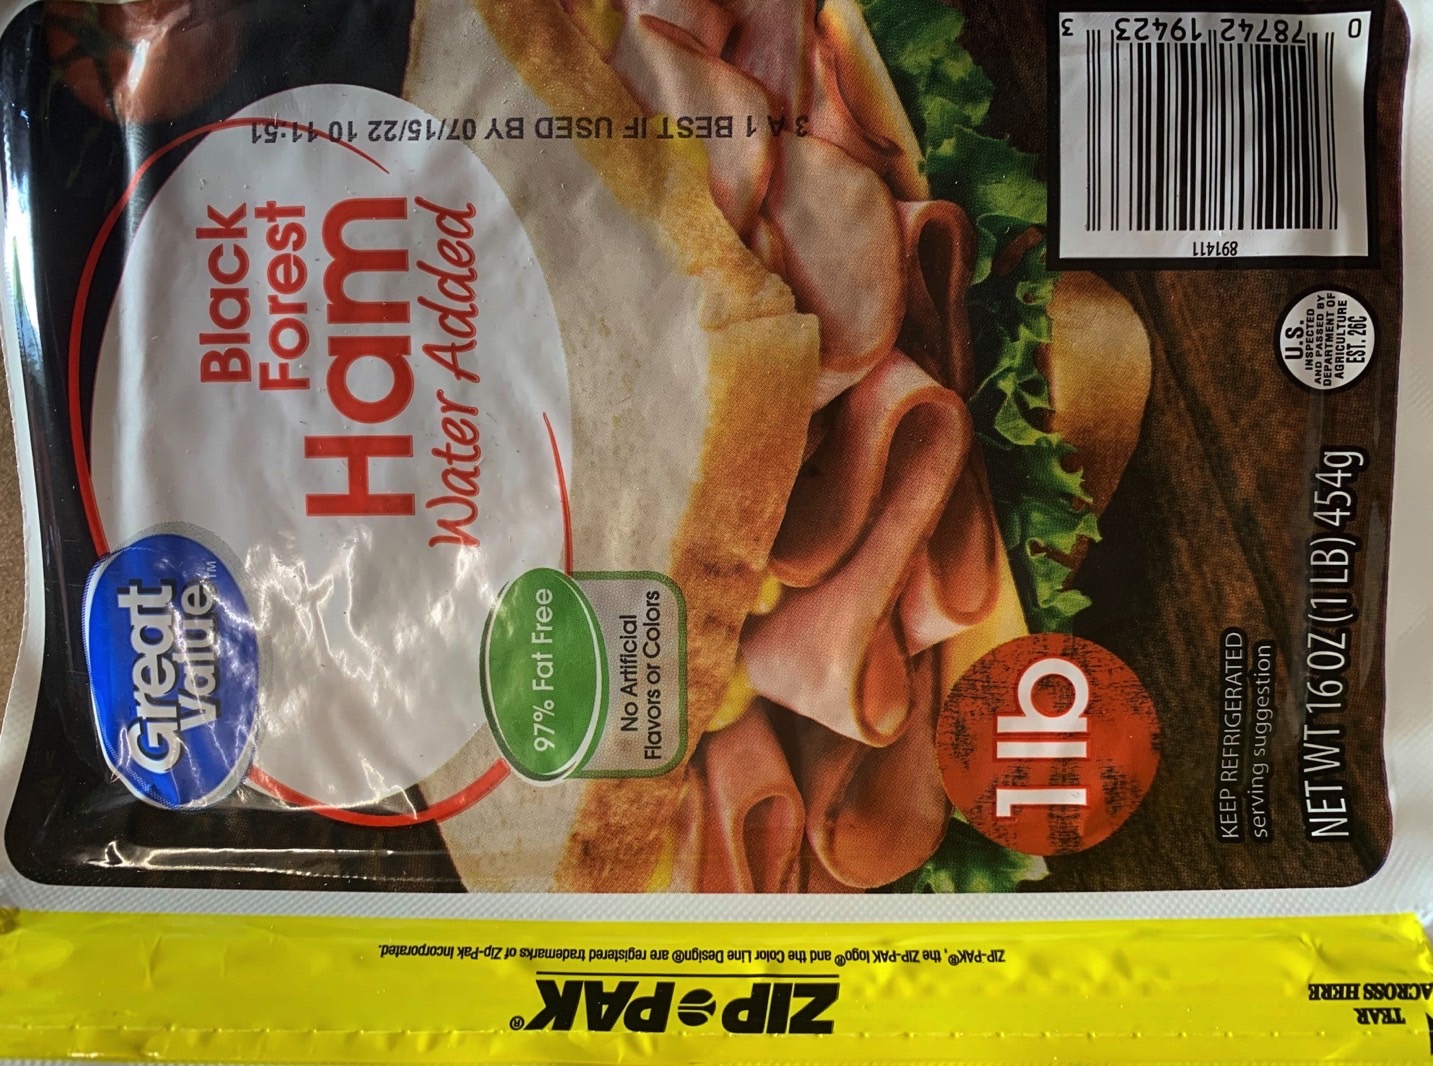 Urgent ham recall If you bought this ham at Walmart, throw it out now